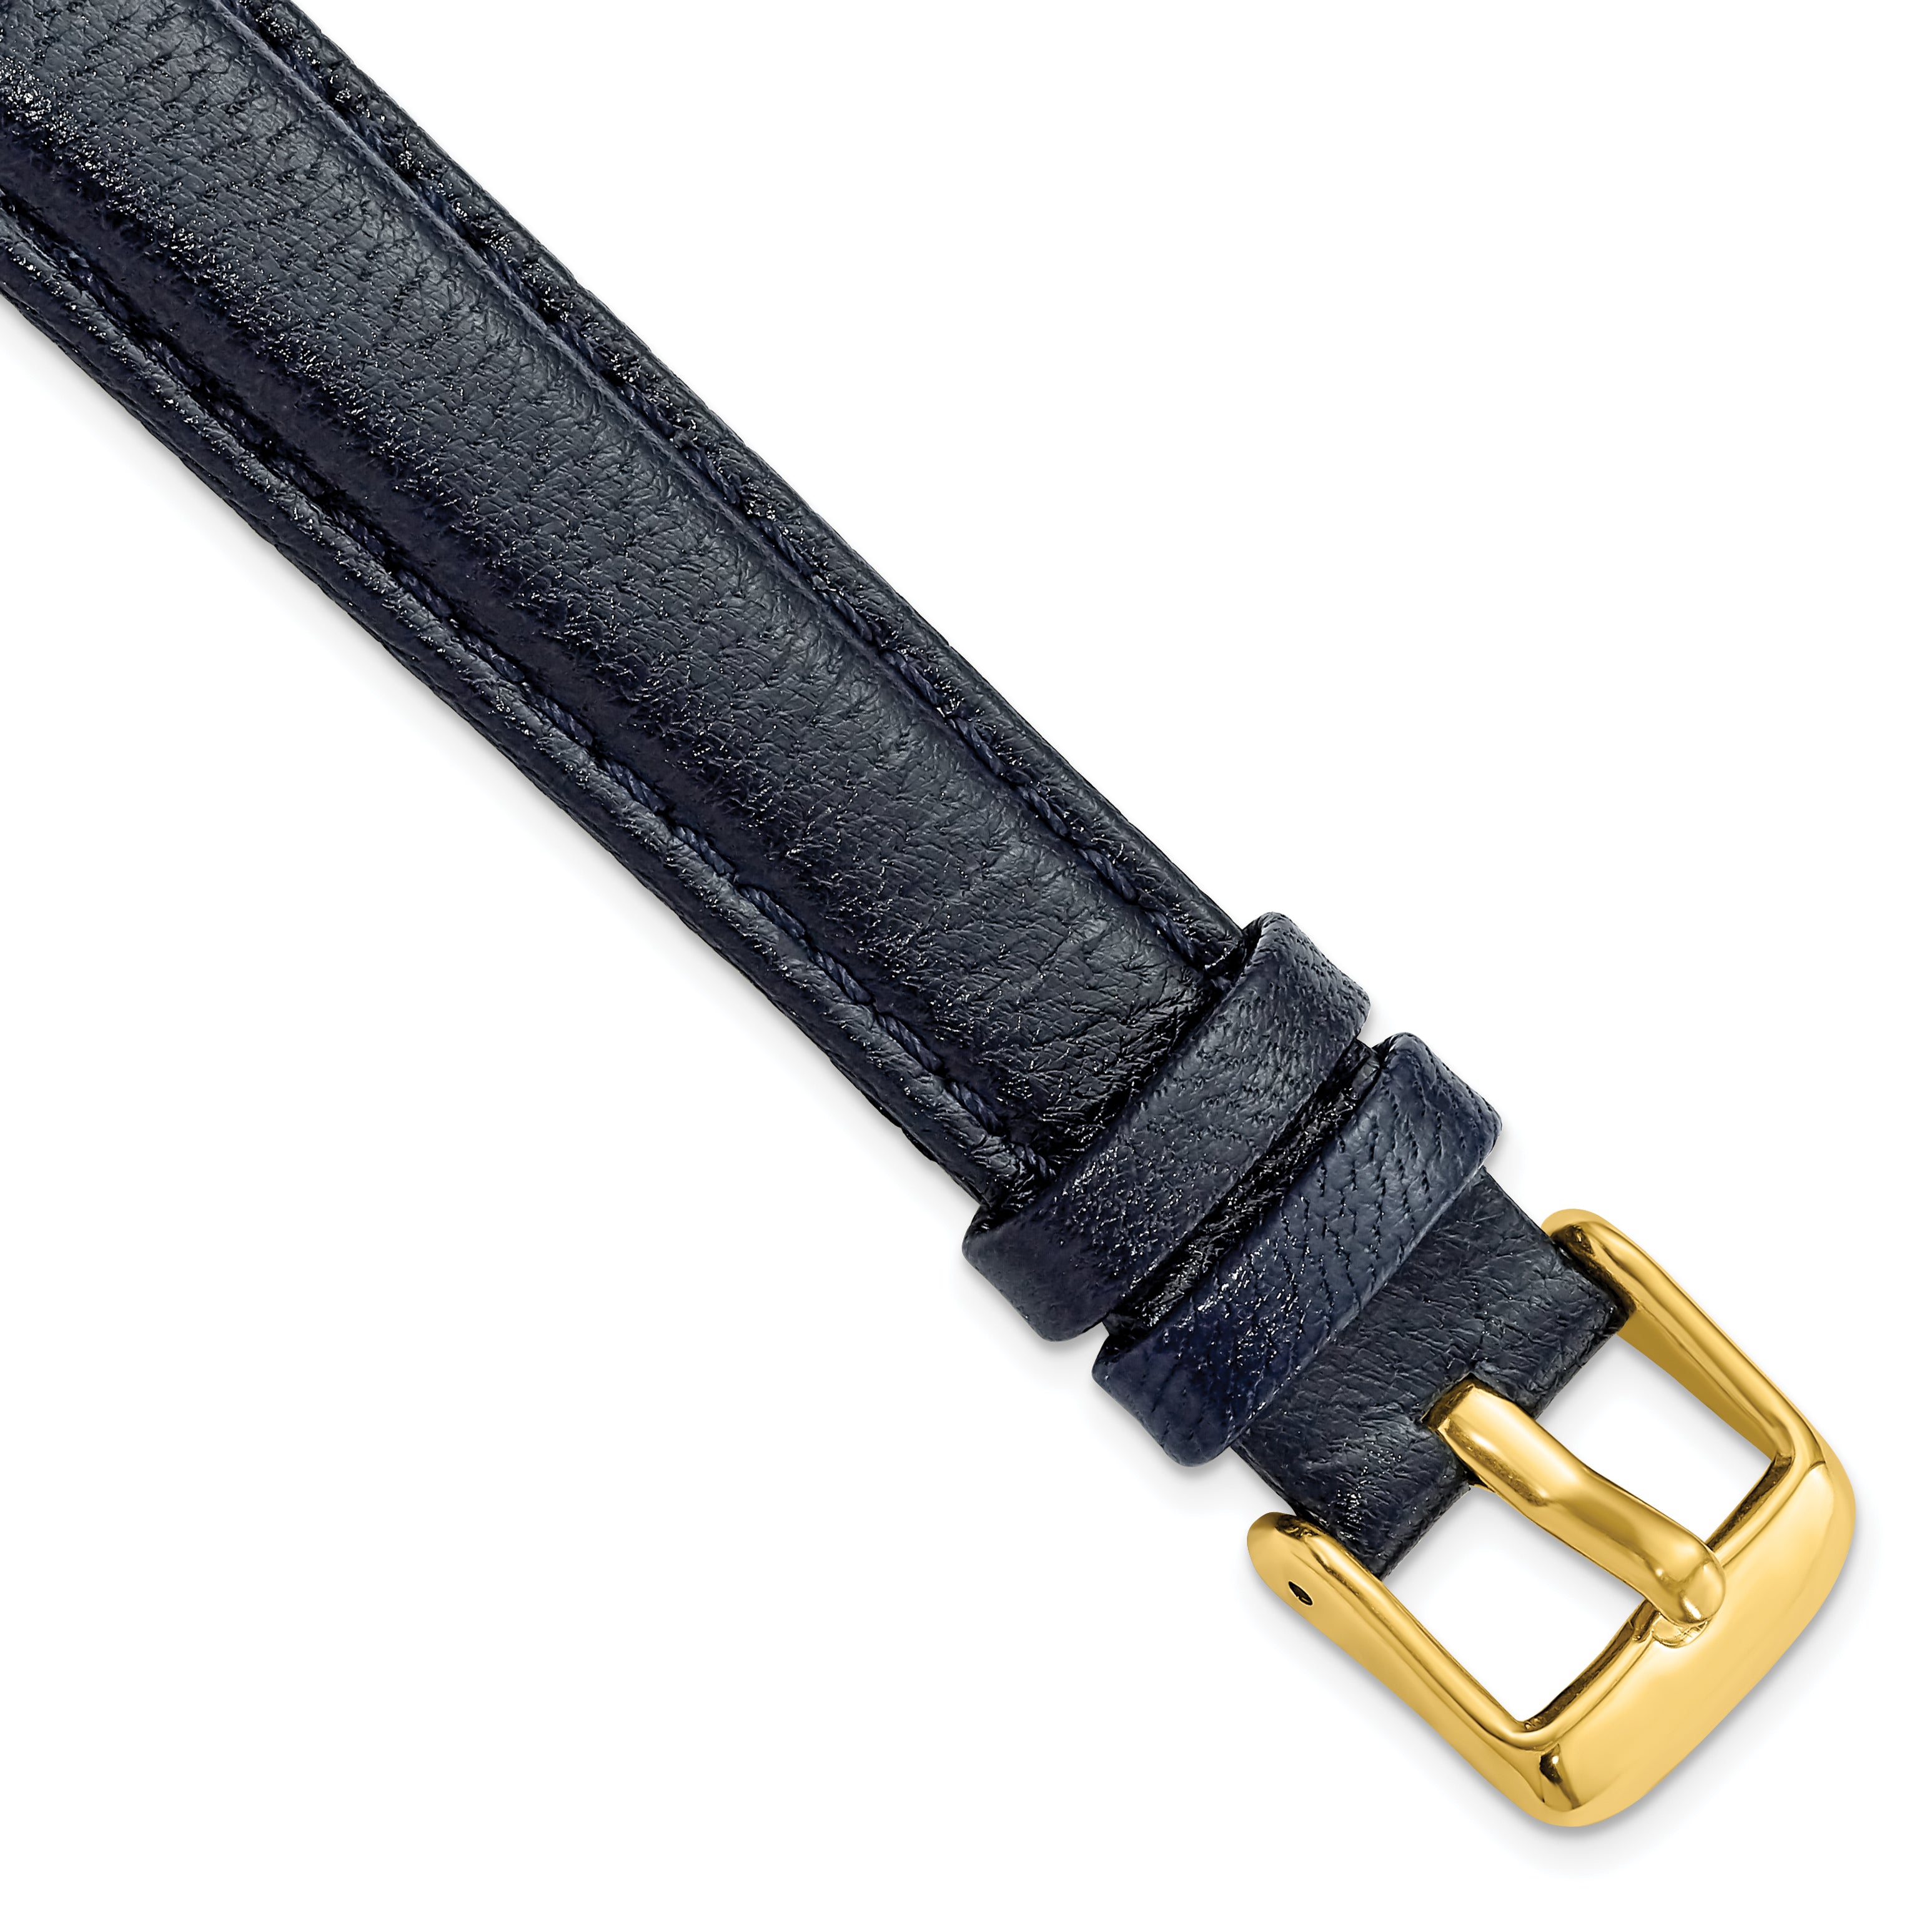 DeBeer 16mm Navy Glove Leather with Gold-tone Panerai Style Buckle 7.75 inch Watch Band